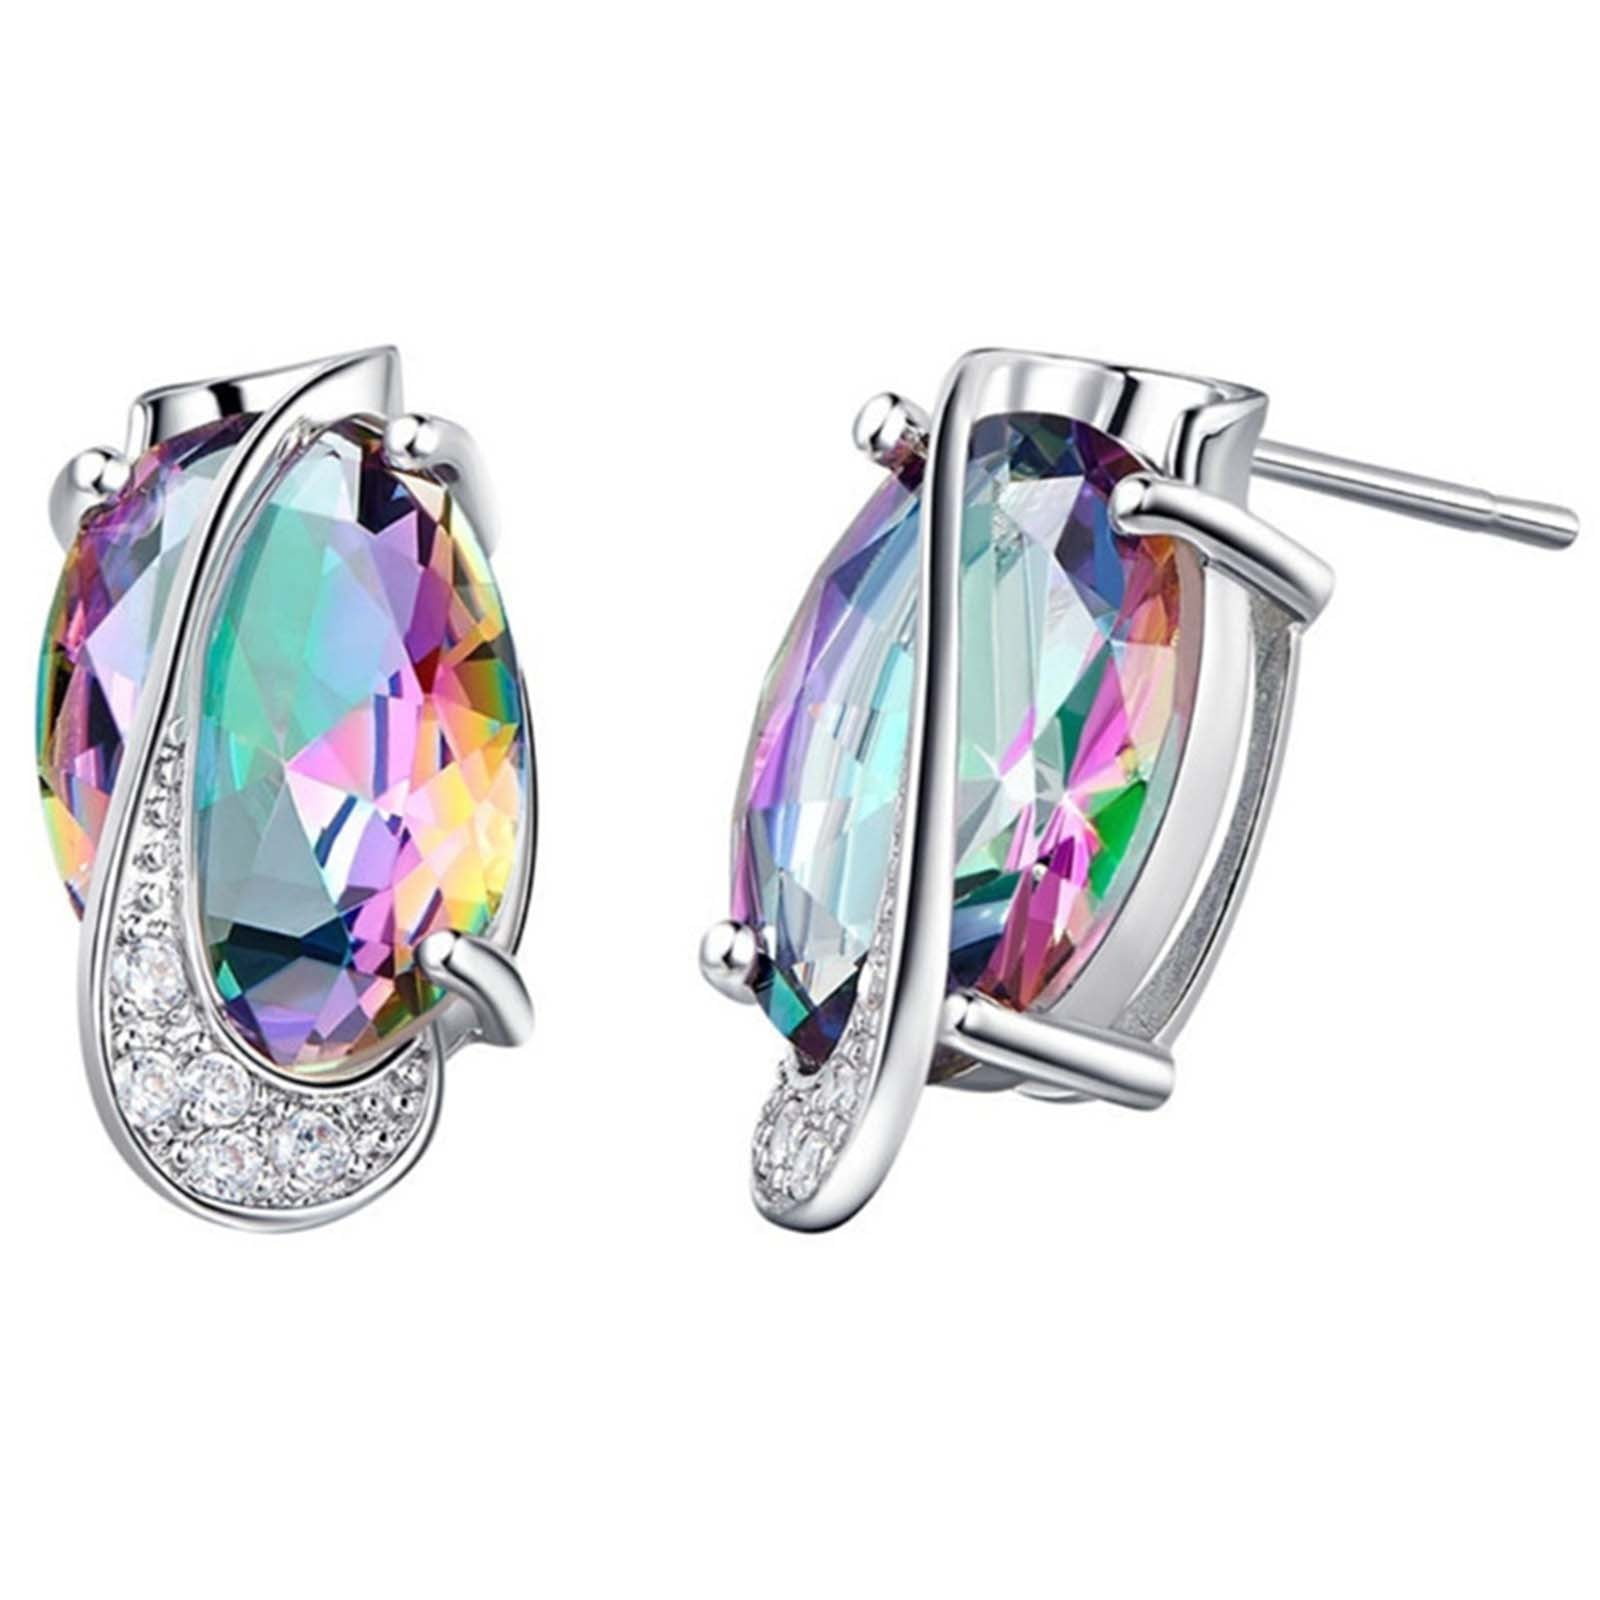 18ct White Gold 0.53ct Rainbow Sapphire & 0.15ct Diamond Fancy Bubble  Earrings | Buy Online | Free Insured UK Delivery